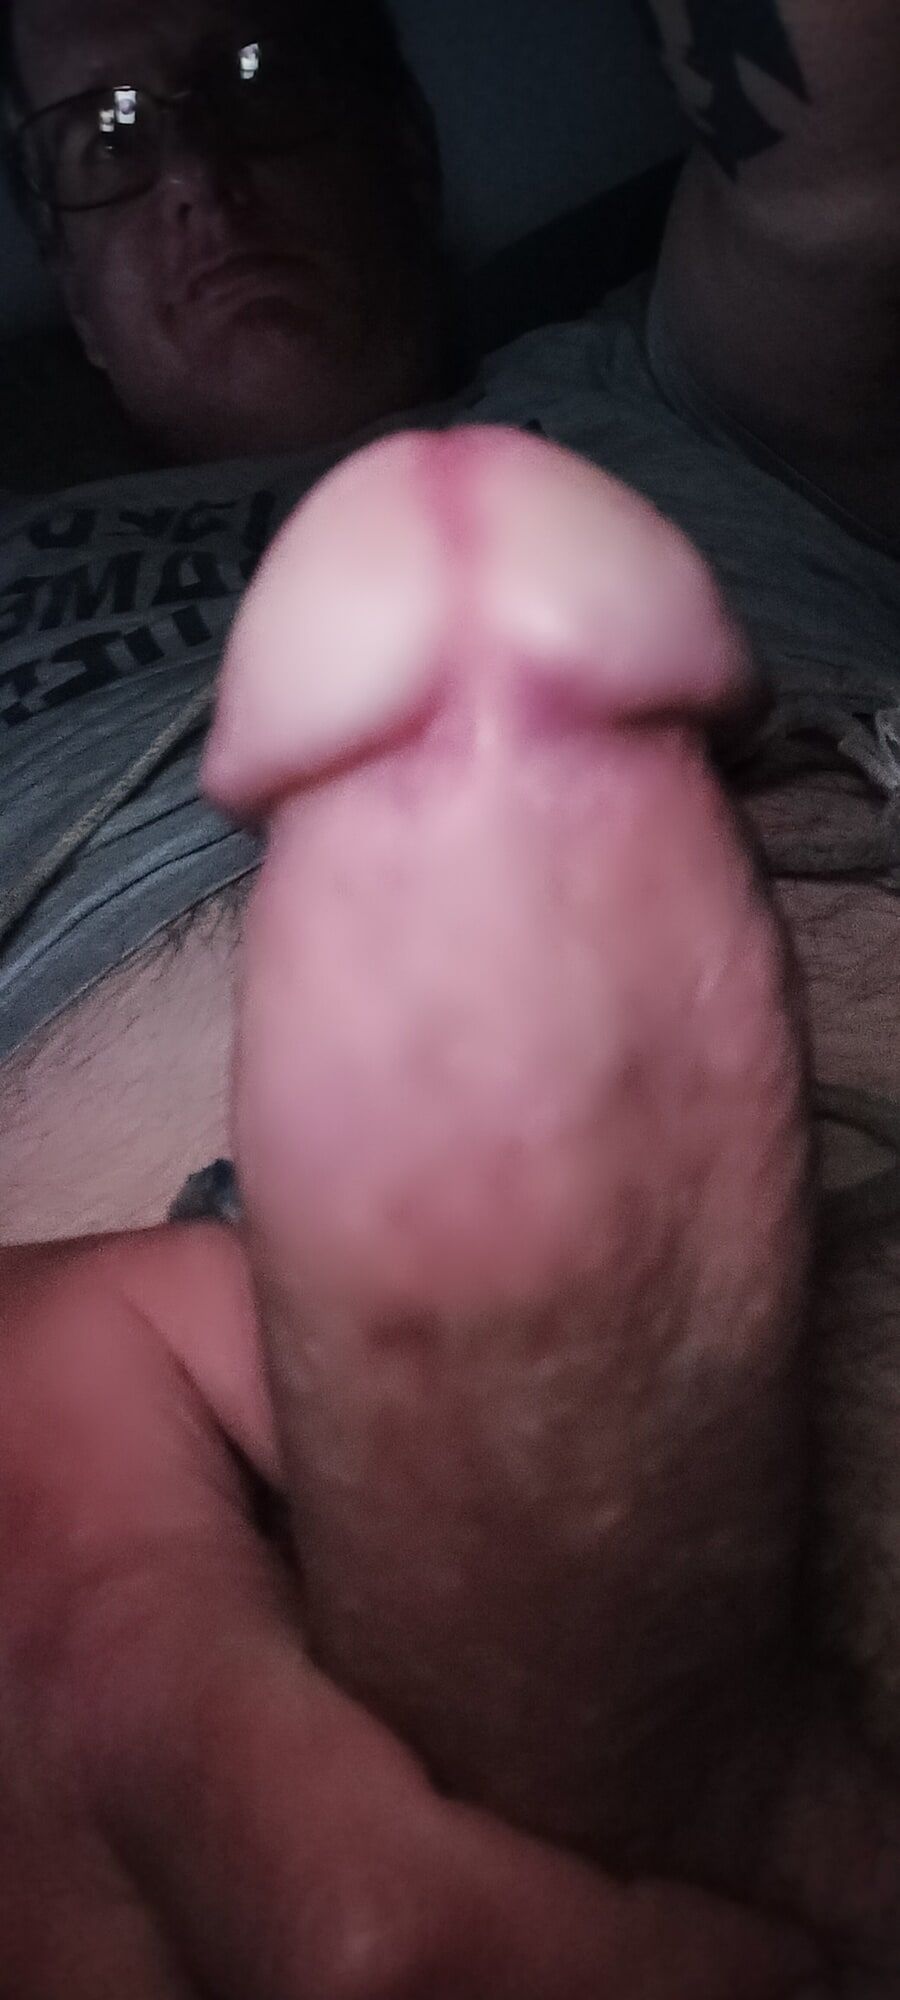 My spun self and I want any and all cocks! #47